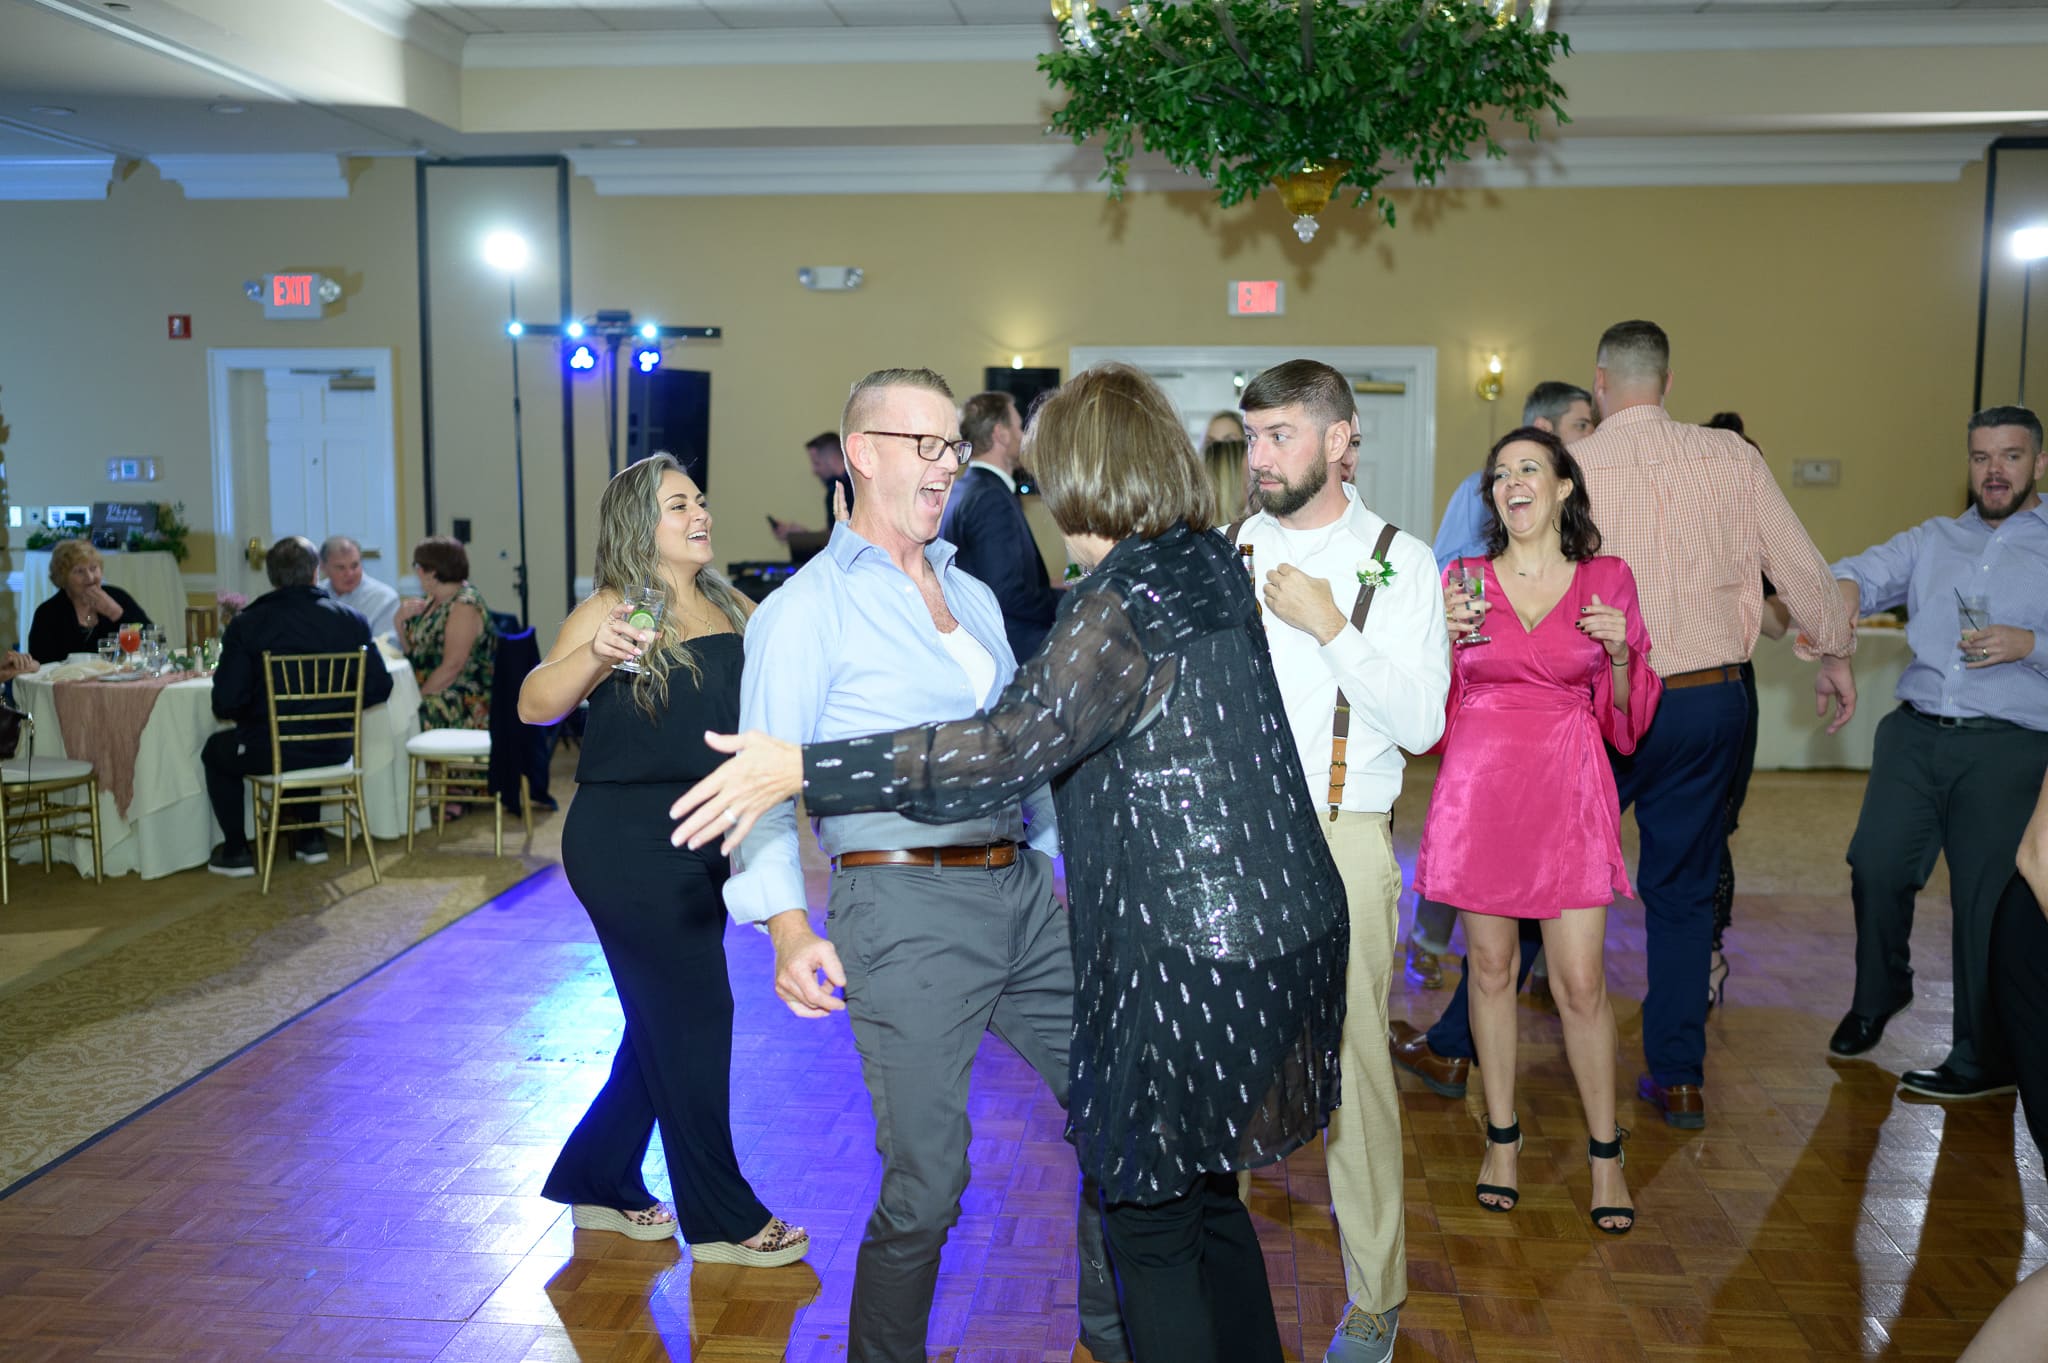 Lots of fun on the dance floor during the reception - Pawleys Plantation